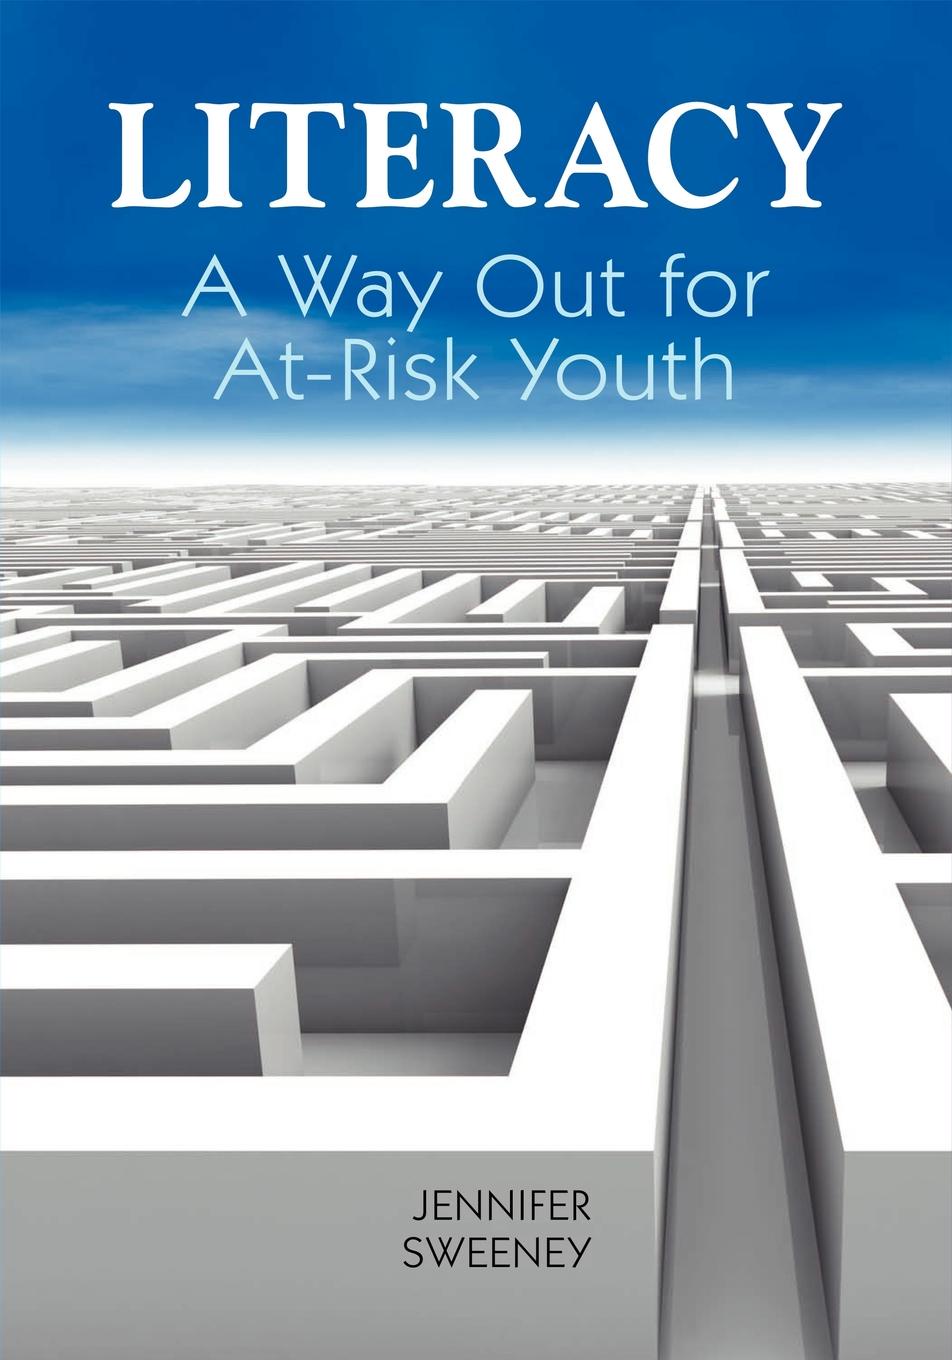 Literacy. A Way Out for At-Risk Youth